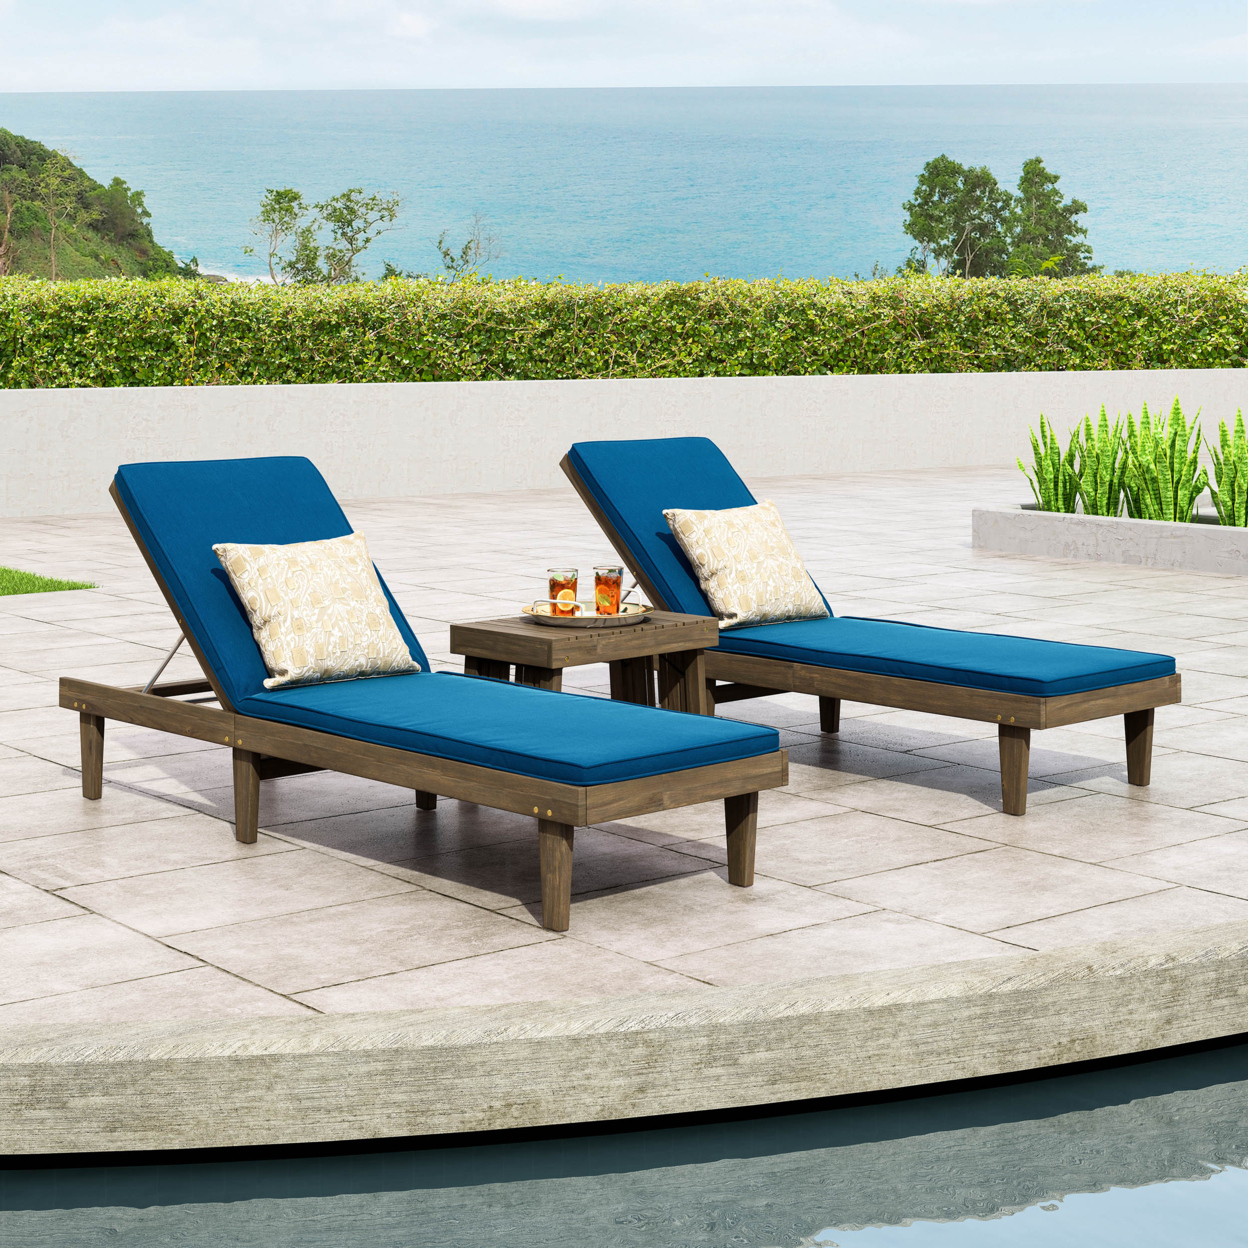 Addisyn Outdoor Acacia Wood 3 Piece Chaise Lounge Set With Water-Resistant Cushions - Gray/rust Orange